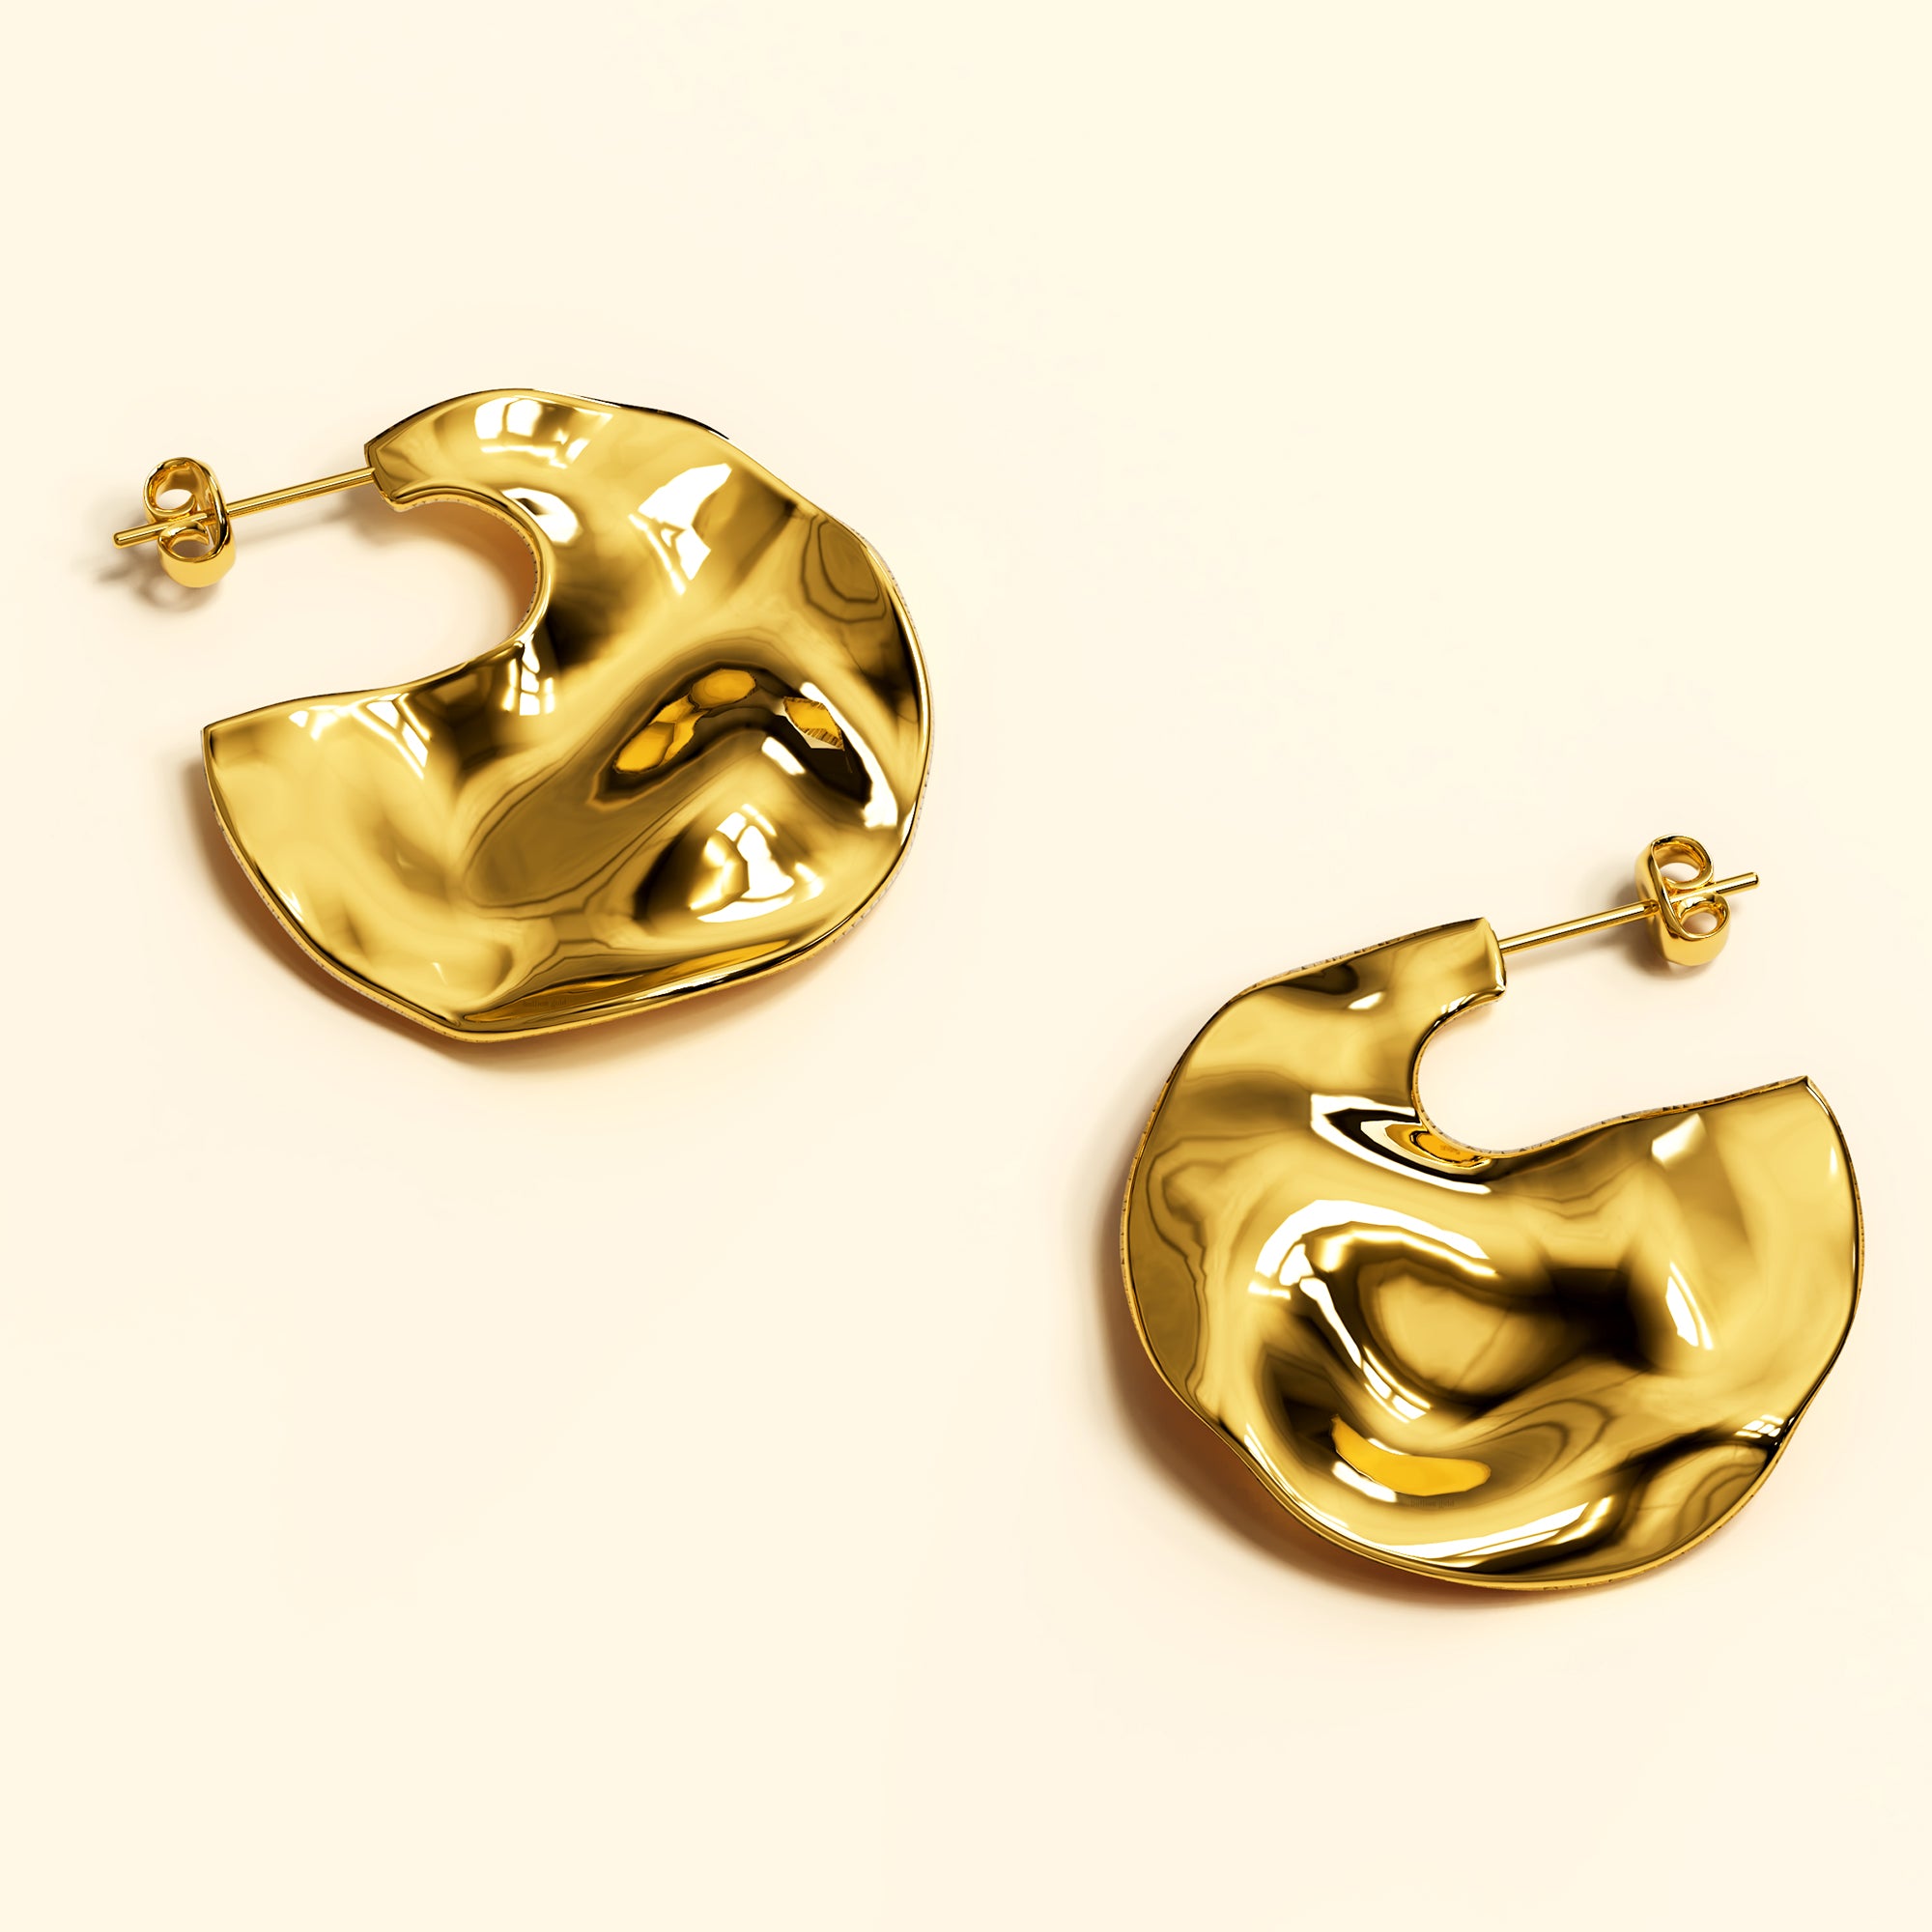 Textured Flat Earrings in Gold